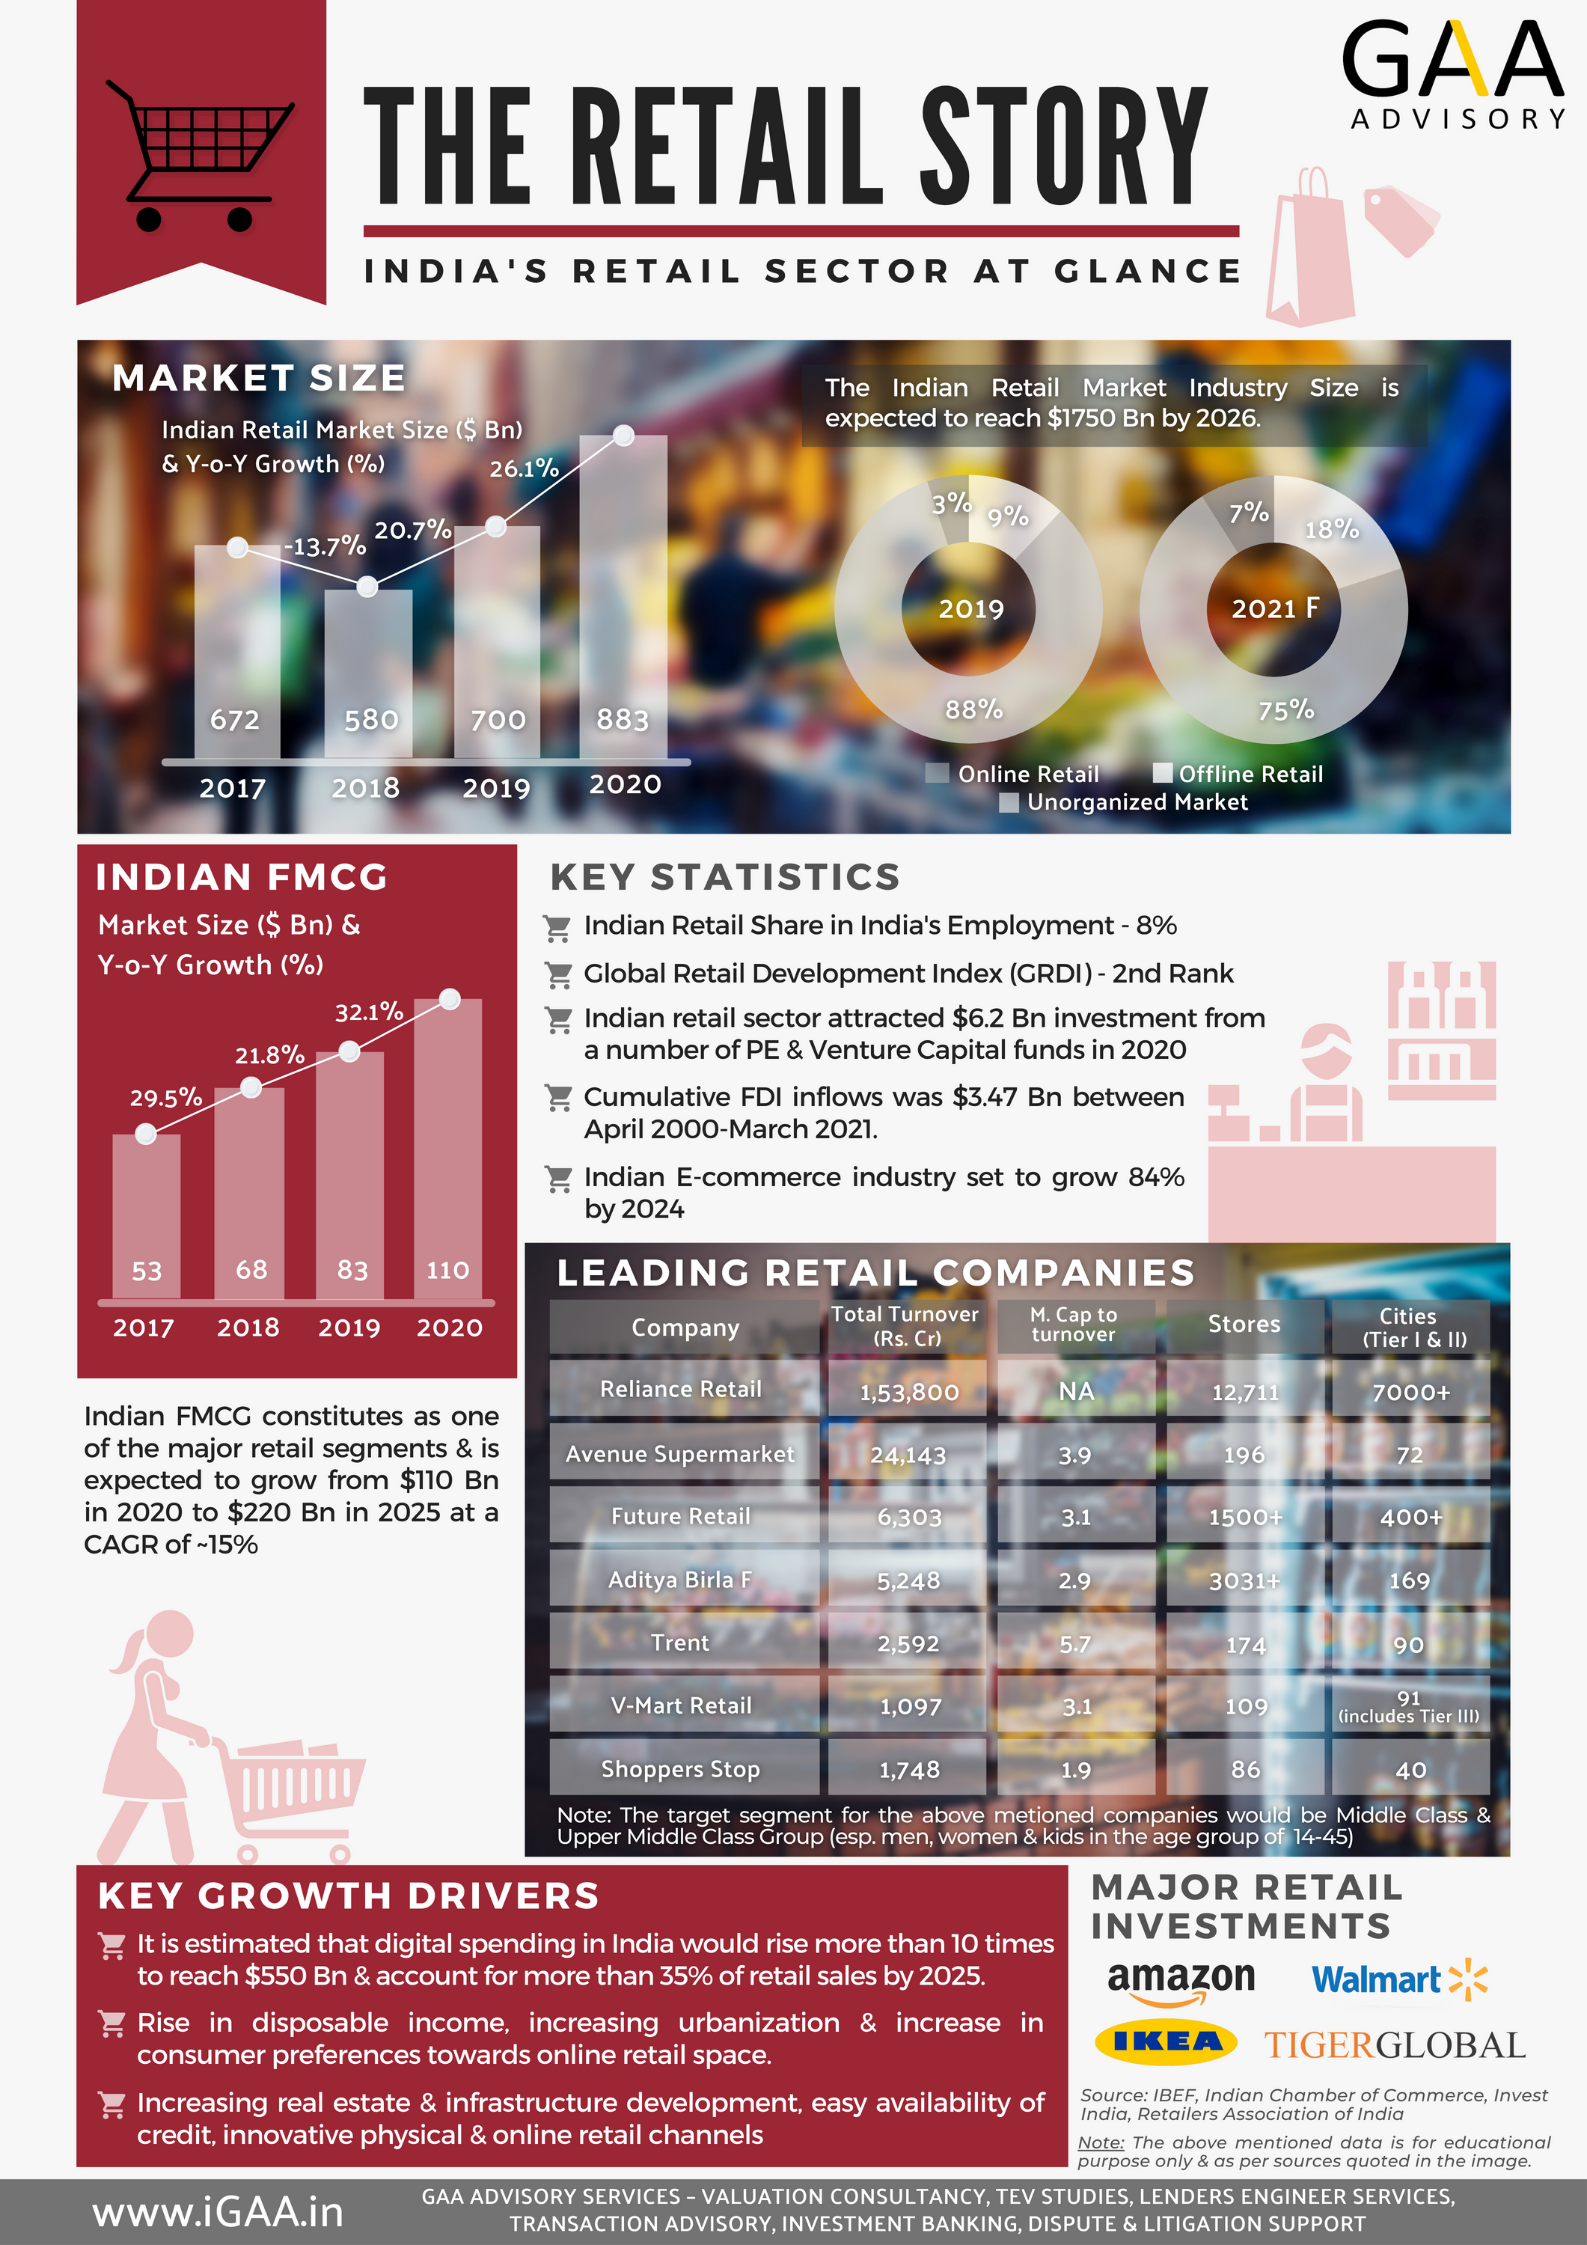 INDIA'S RETAIL SECTOR AT GLANCE